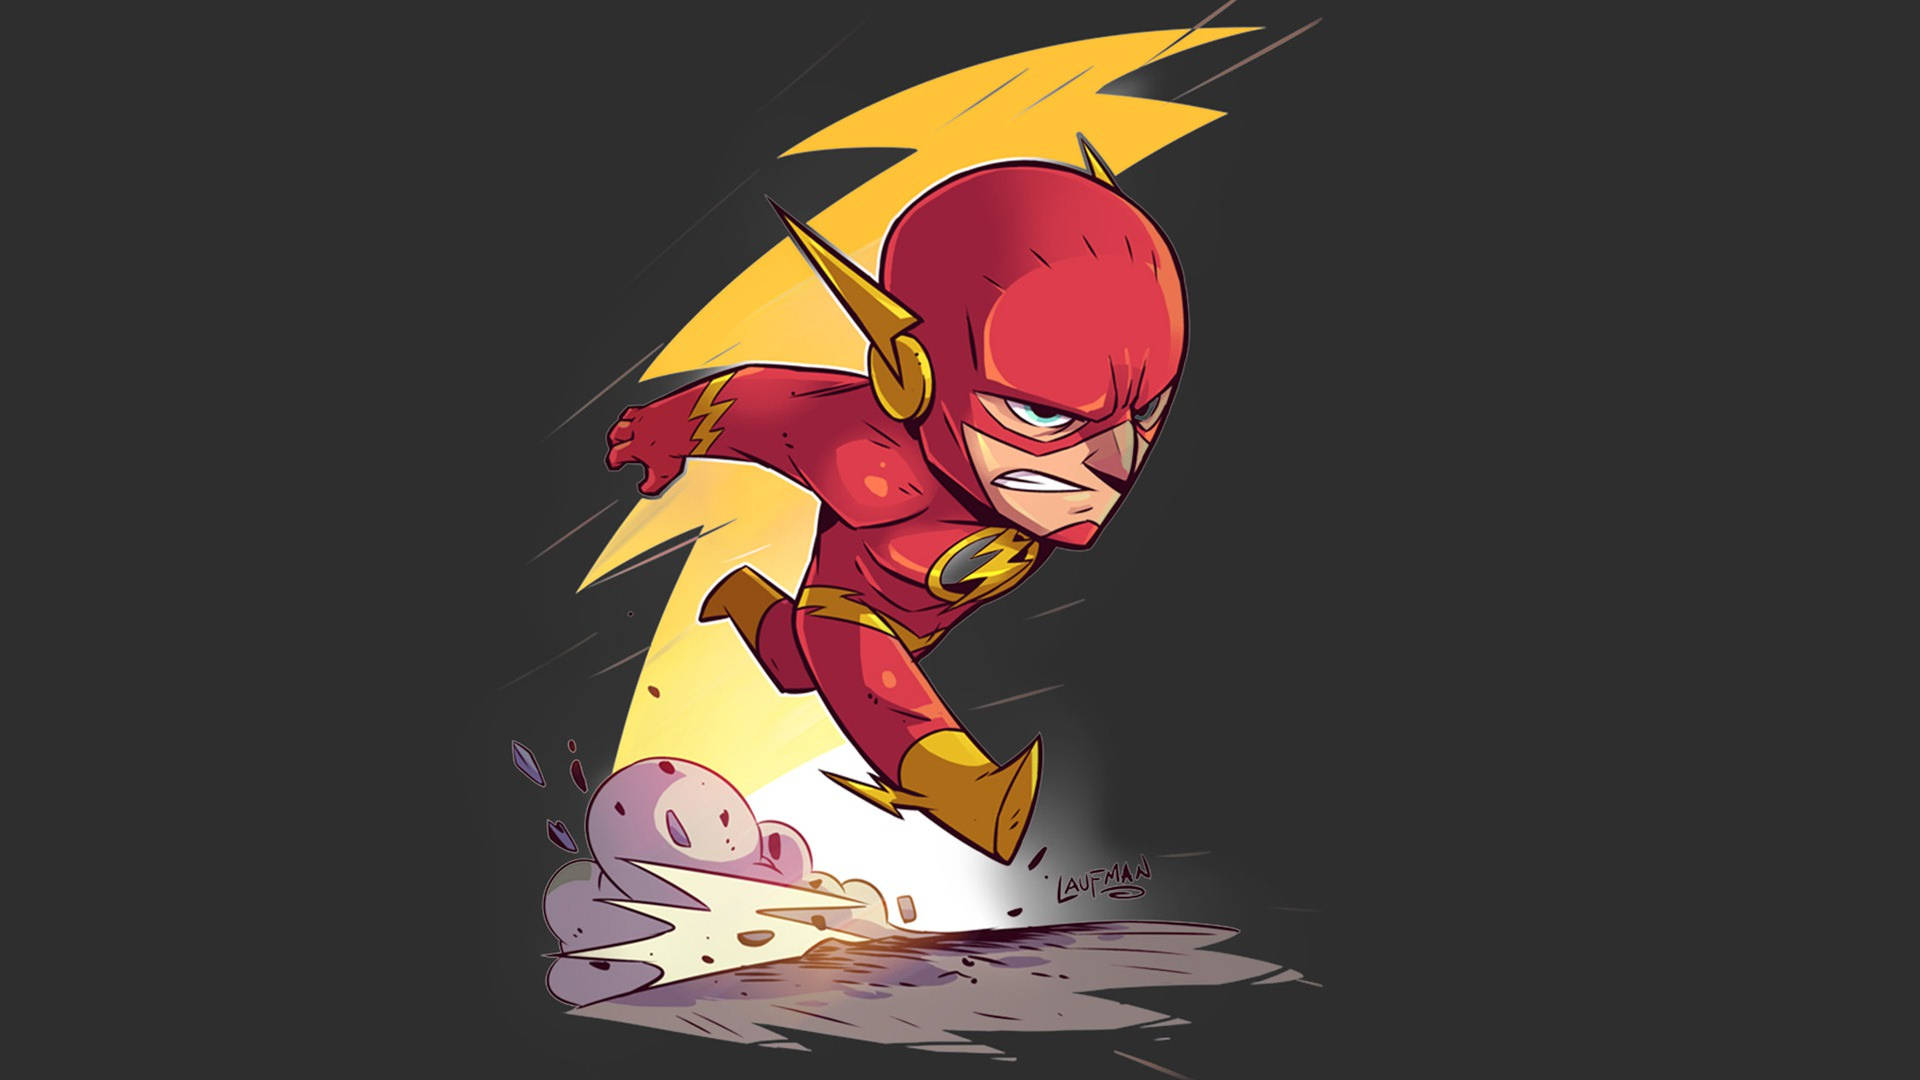 1920X1080 The Flash Wallpaper and Background